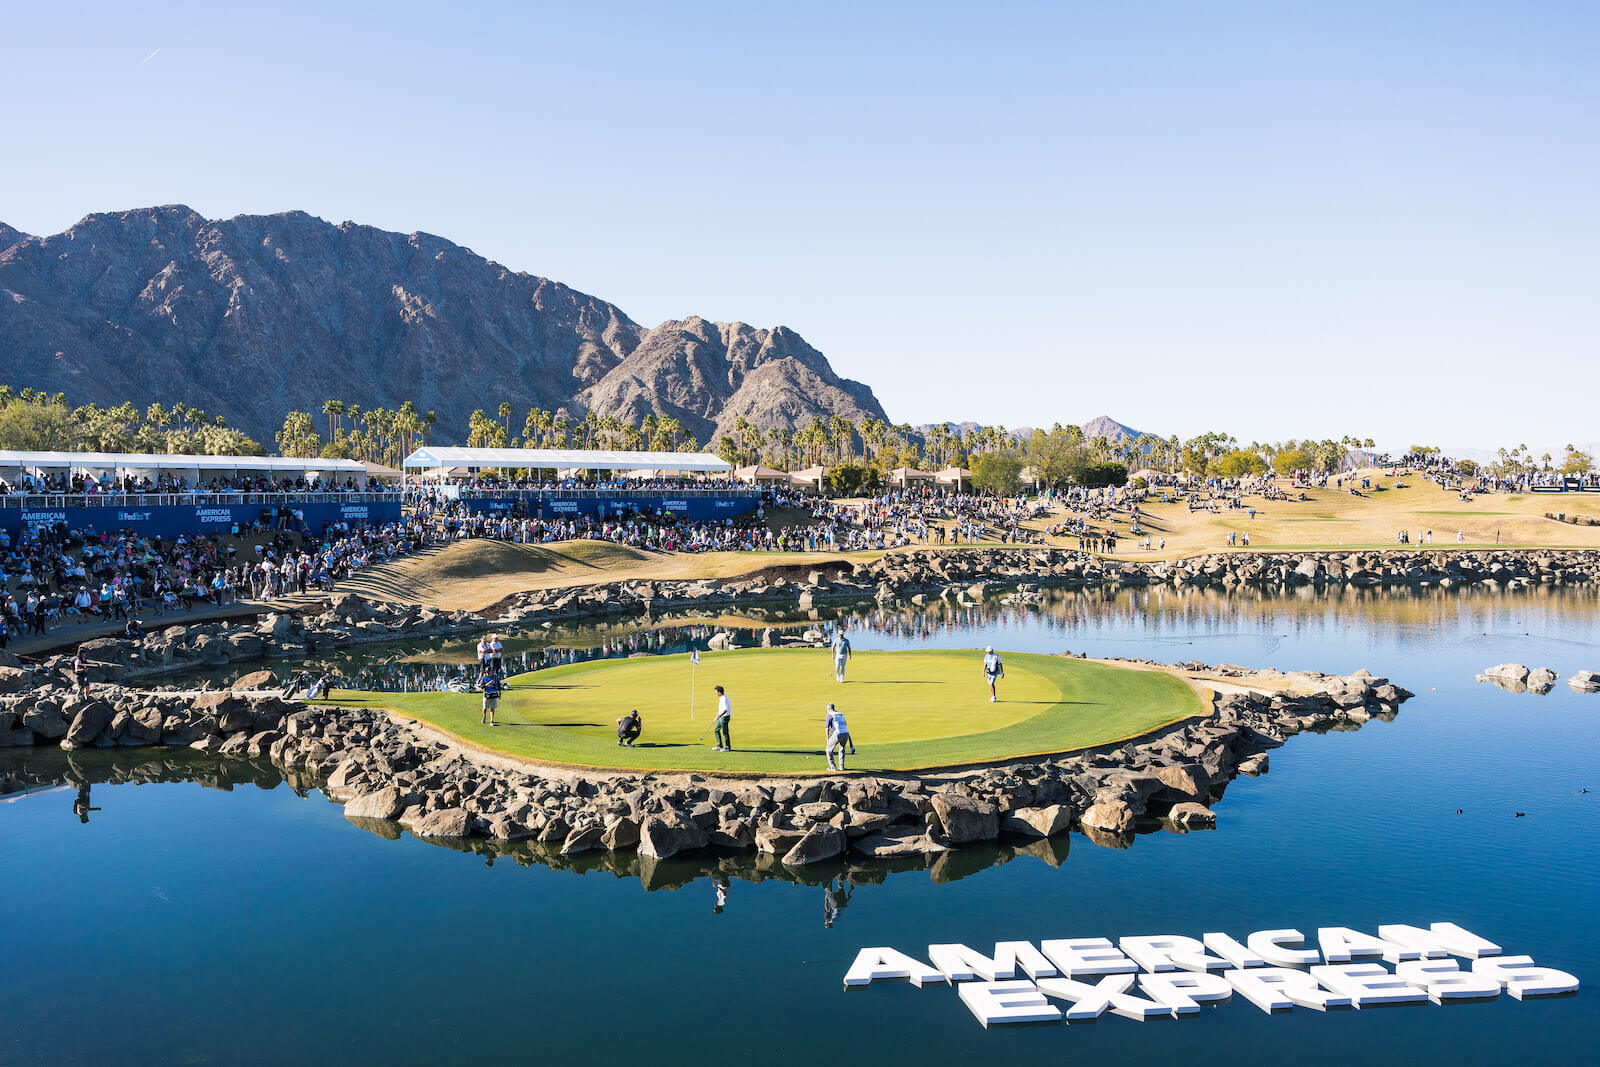 american express letters on a pond in middle of gold course surrounded by mountains